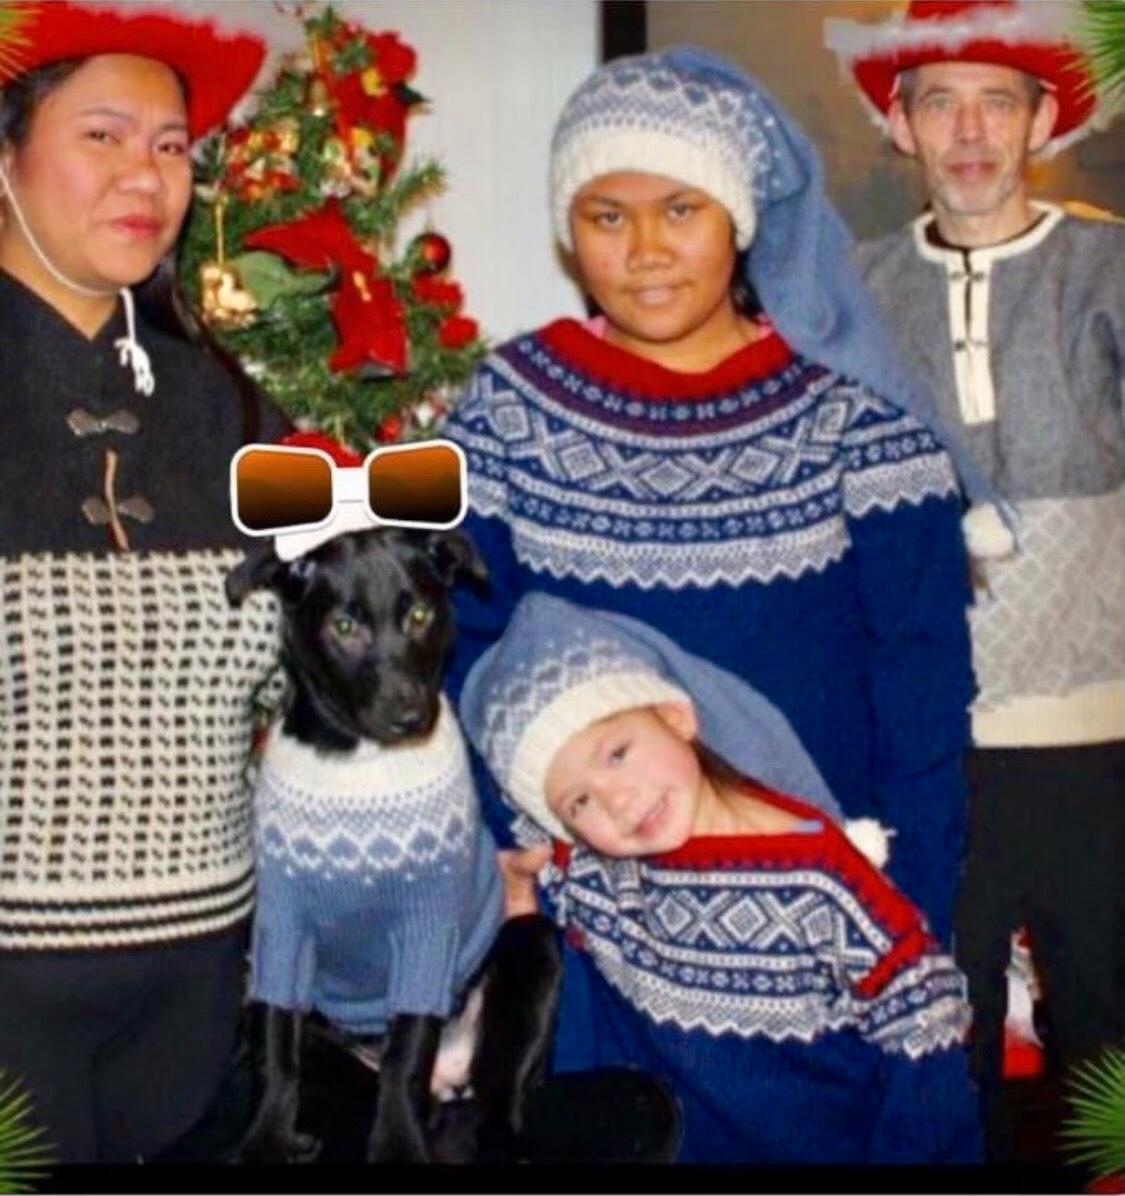 Before the clash: Here, Laika May takes center stage with her family on another occasion.  From left are Mary Joselle Rosaroso Baltomar Holm, Josela May and Ovind Holm.  Laika May and Hannah May in front of the dog.